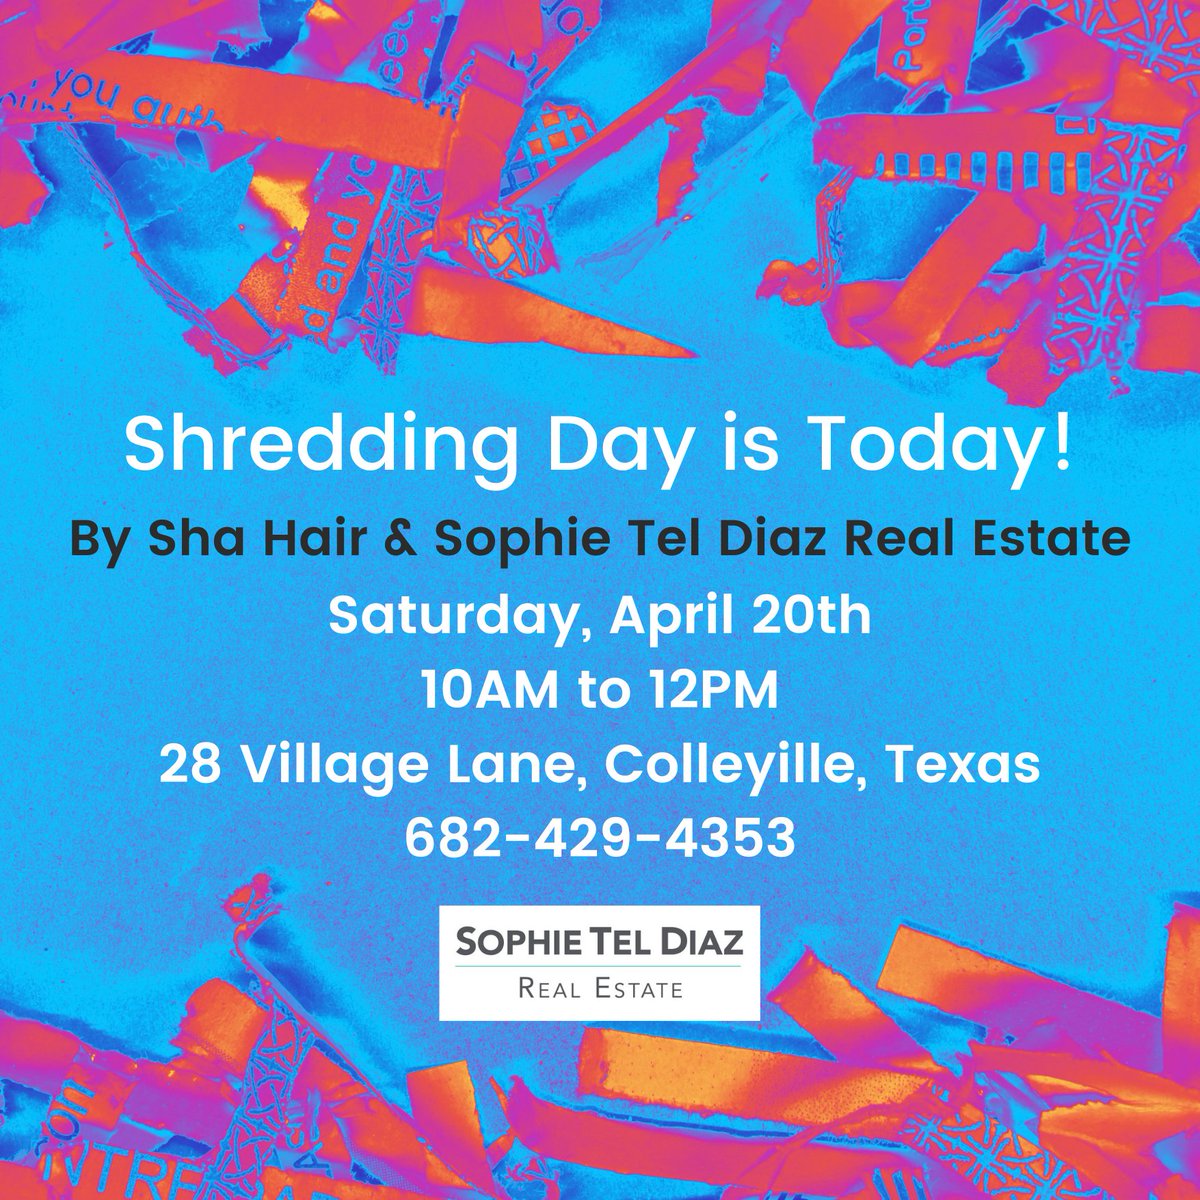 RAIN OR SHINE SHREDDING DAY IS HAPPENING TODAY! ☔️
📅Saturday, April 20 from 10am to 12pm
📍28 Village Lane, Colleyville
Call or Text me 682-429-4353  #shreddingday #free #dfwrealtors #dfwrealtor #sophieteldiazrealestate #shahairrealtor #shasellsrealestate #colleyvilletx